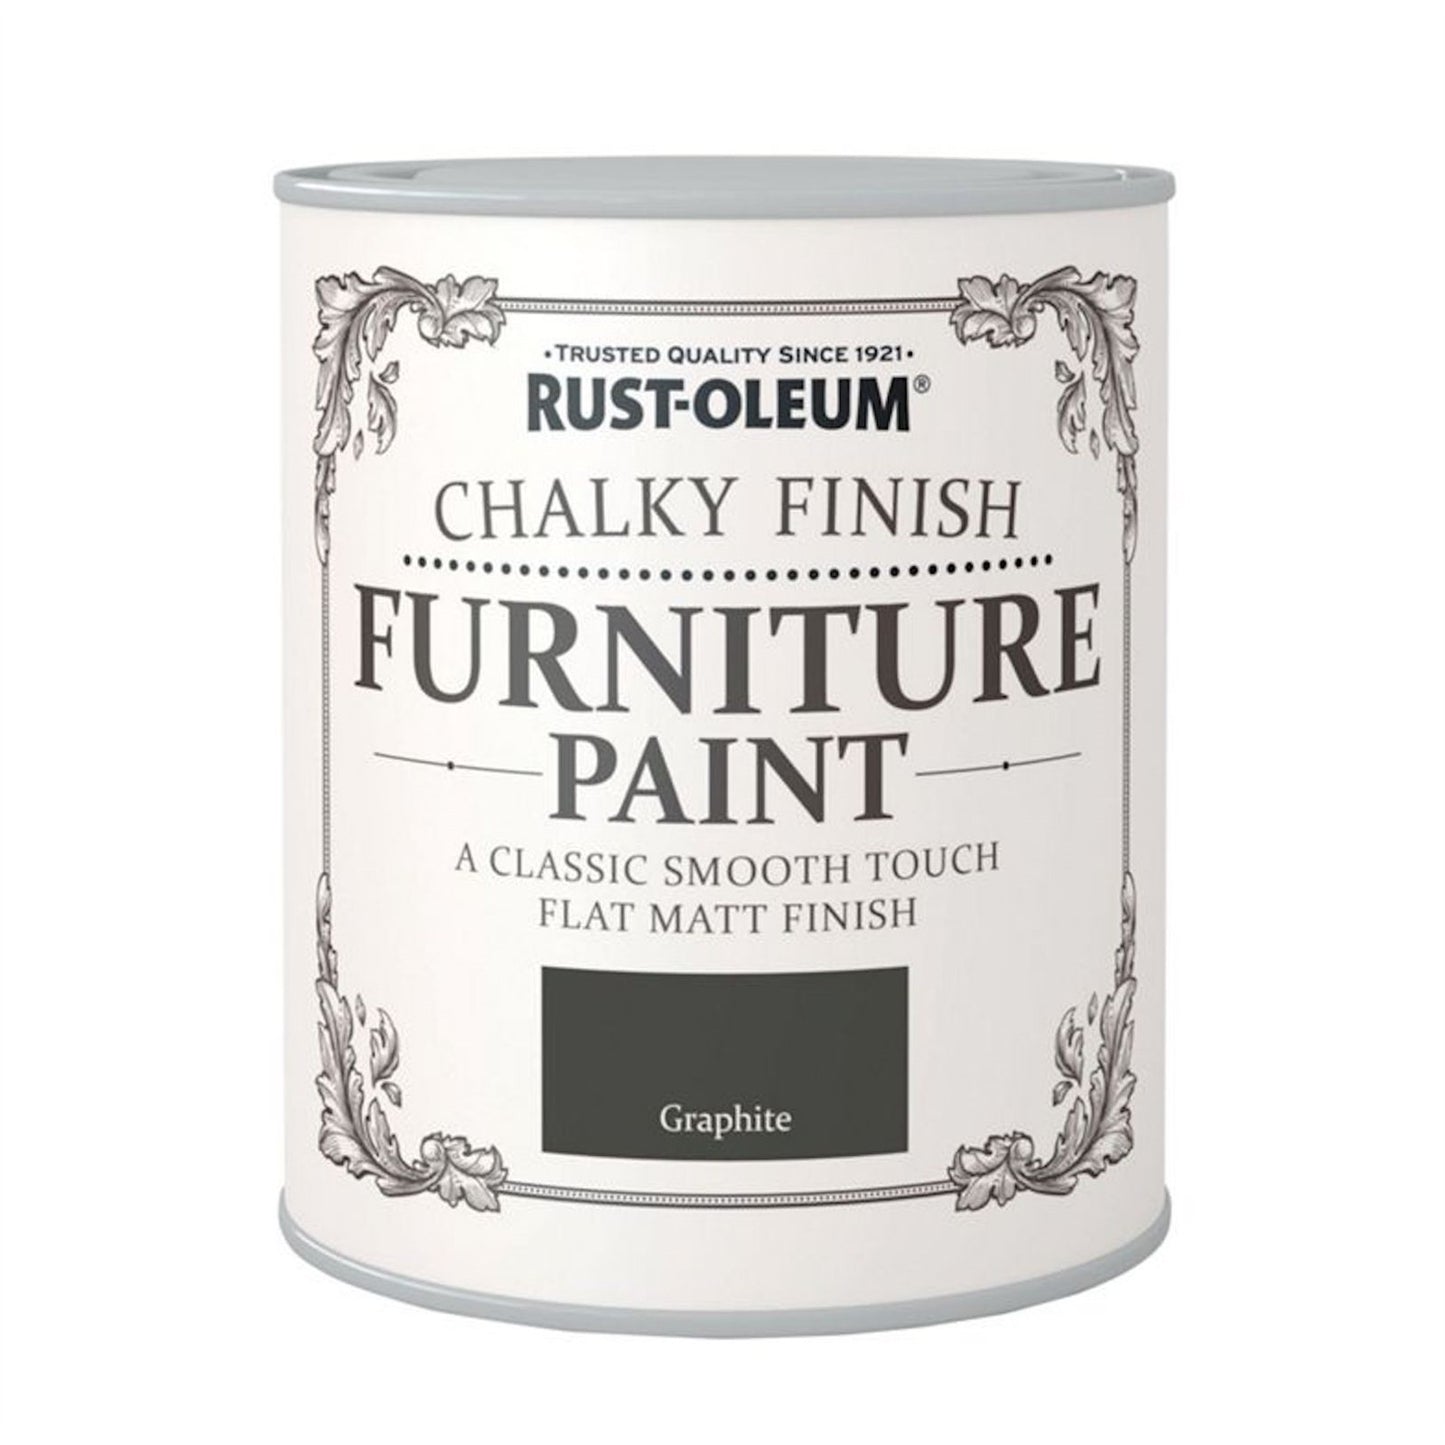 Rust-Oleum Chalky Finish Furniture Paint Graphite